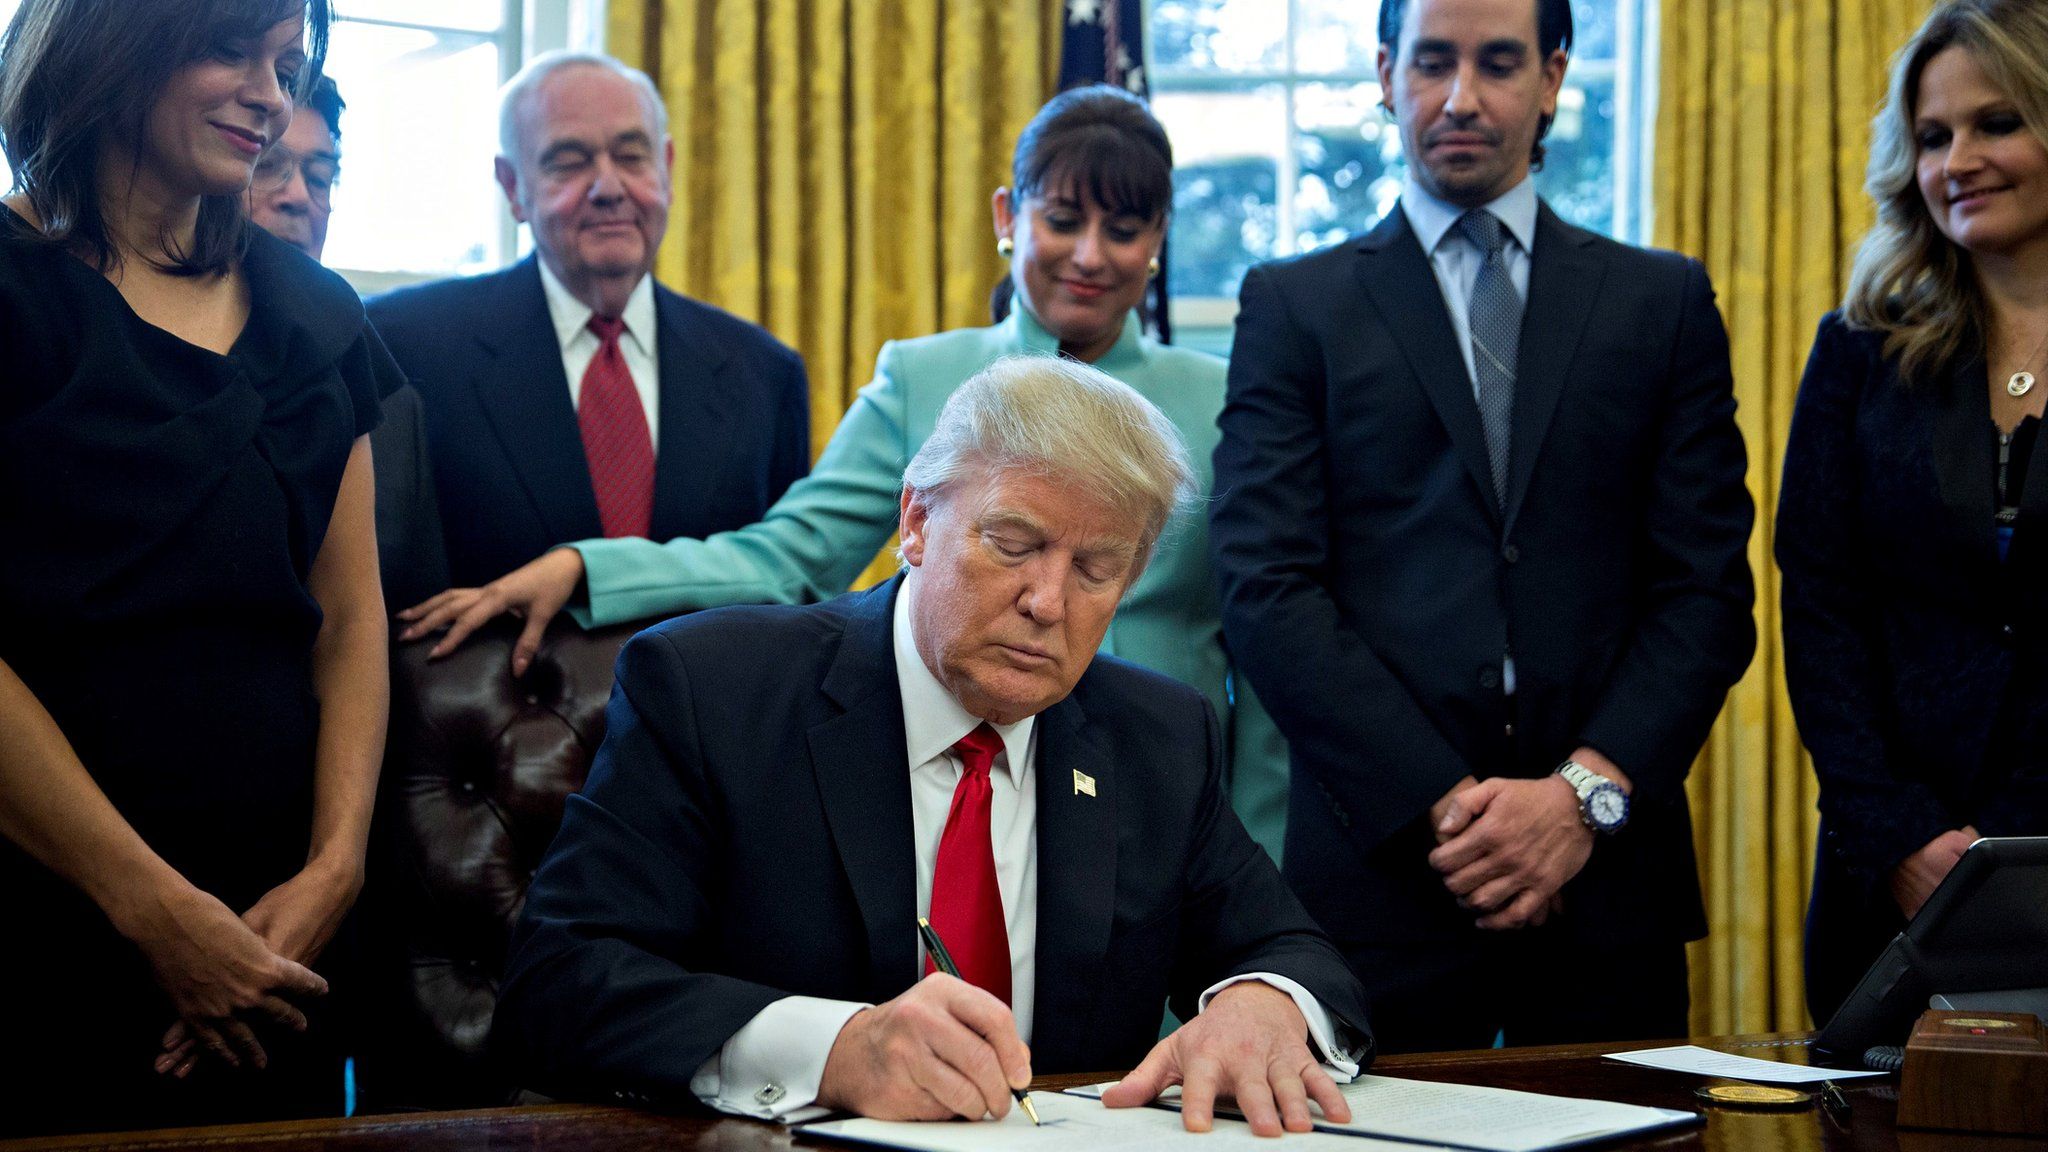 US President Donald Trump (C) signs an executive order while surrounded by small business leaders in the Oval Office of the White House in in Washington, D.C., US, 30 January 2017.